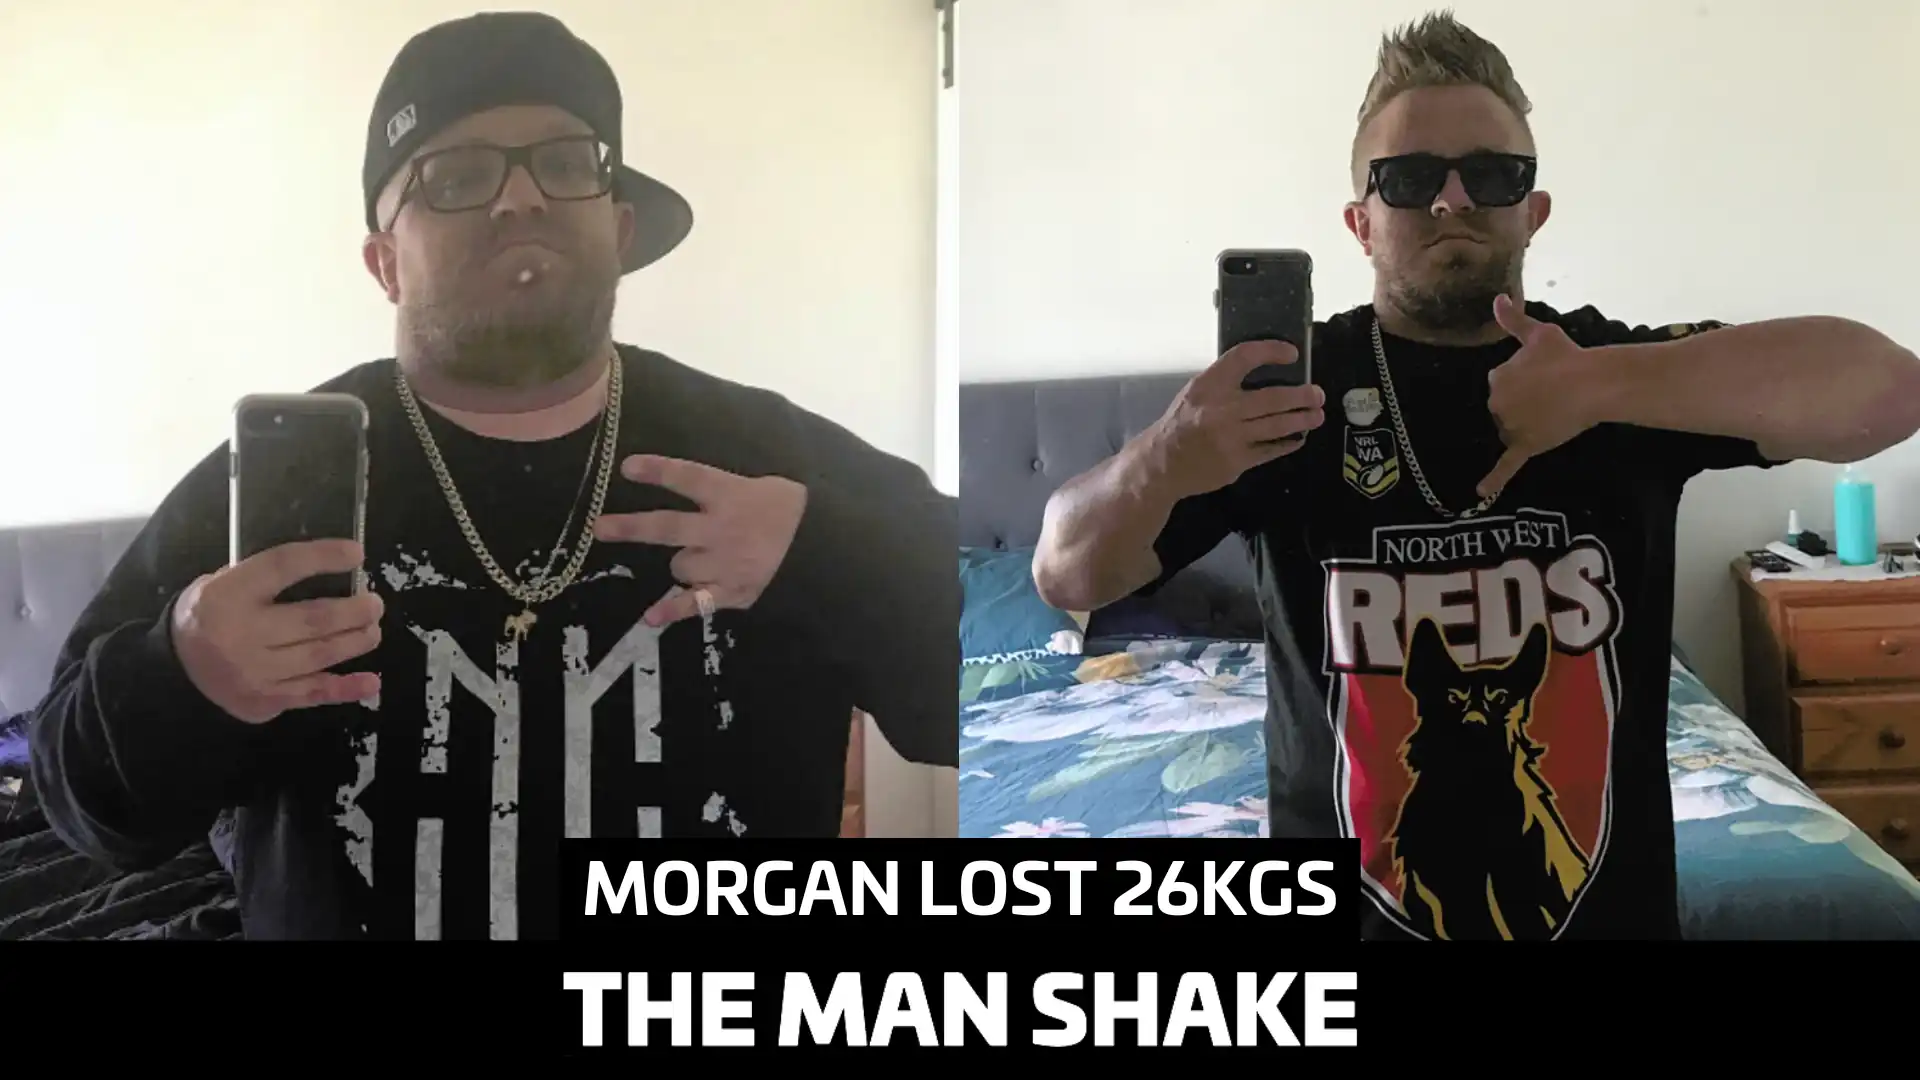 The MAN Shake - 🔥 Tim Lost 30kg 🔥 Now that I've lost the weight the  biggest difference is going from size 40 pants to size 34. I feel great  especially when